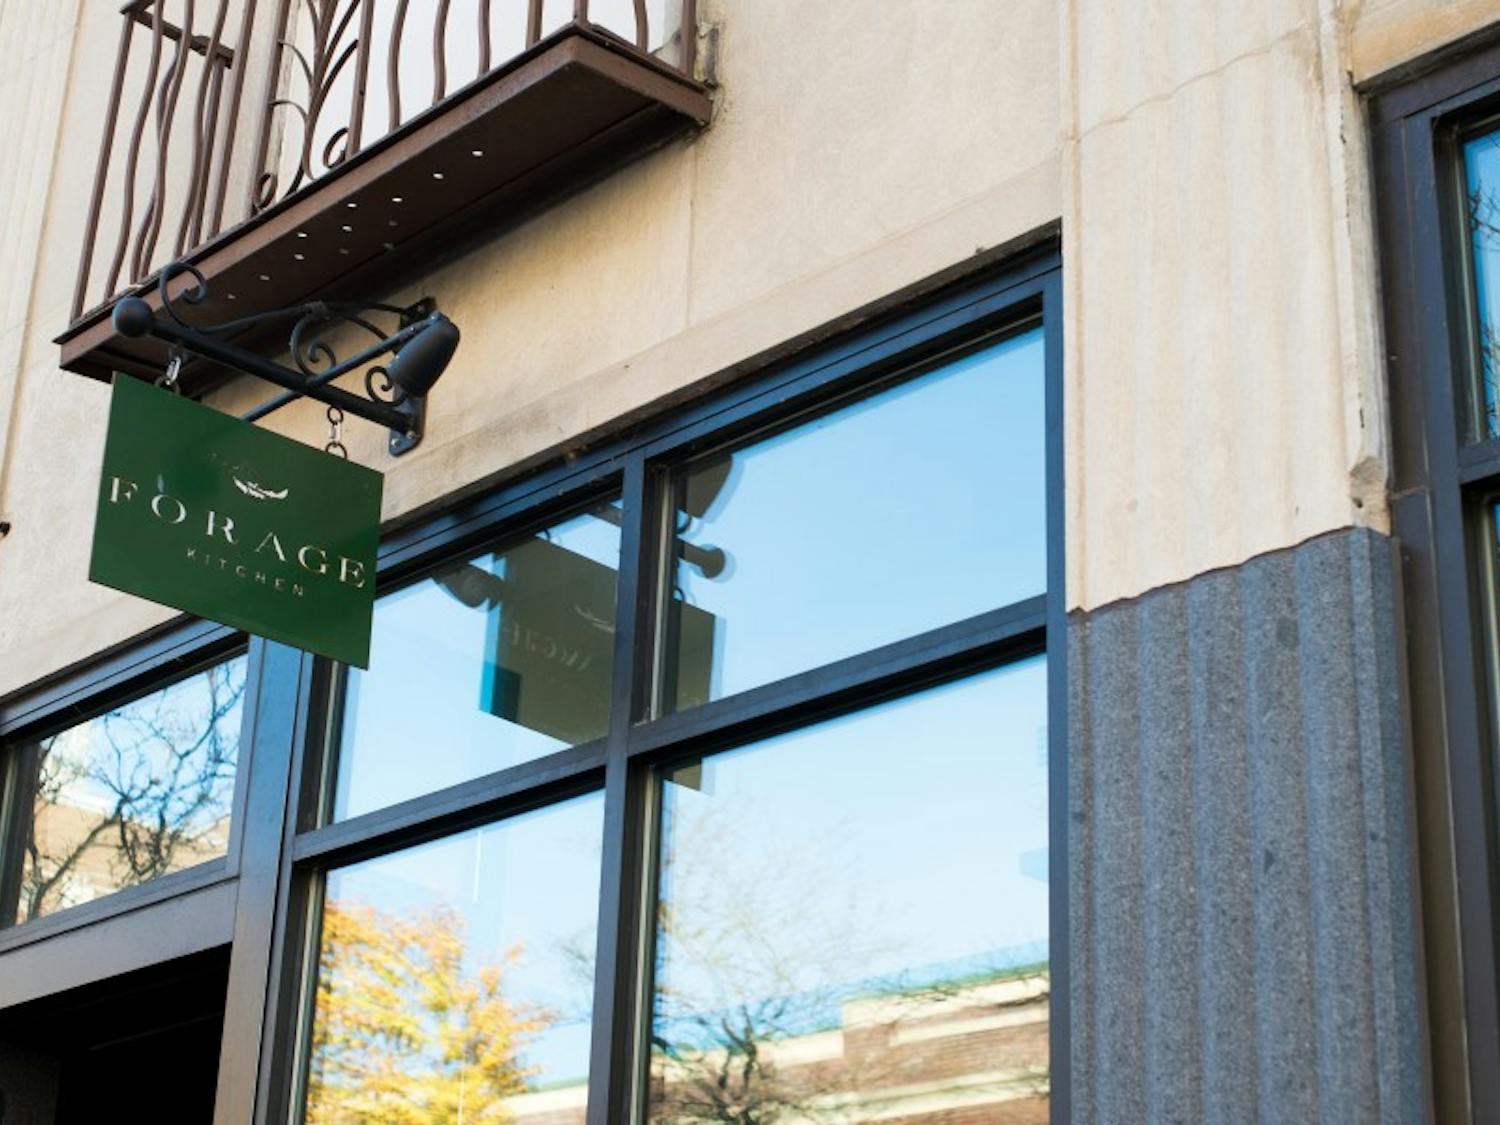 Forage Kitchen is a new restaurant on State Street that values bringing convenience and a ordability to students.